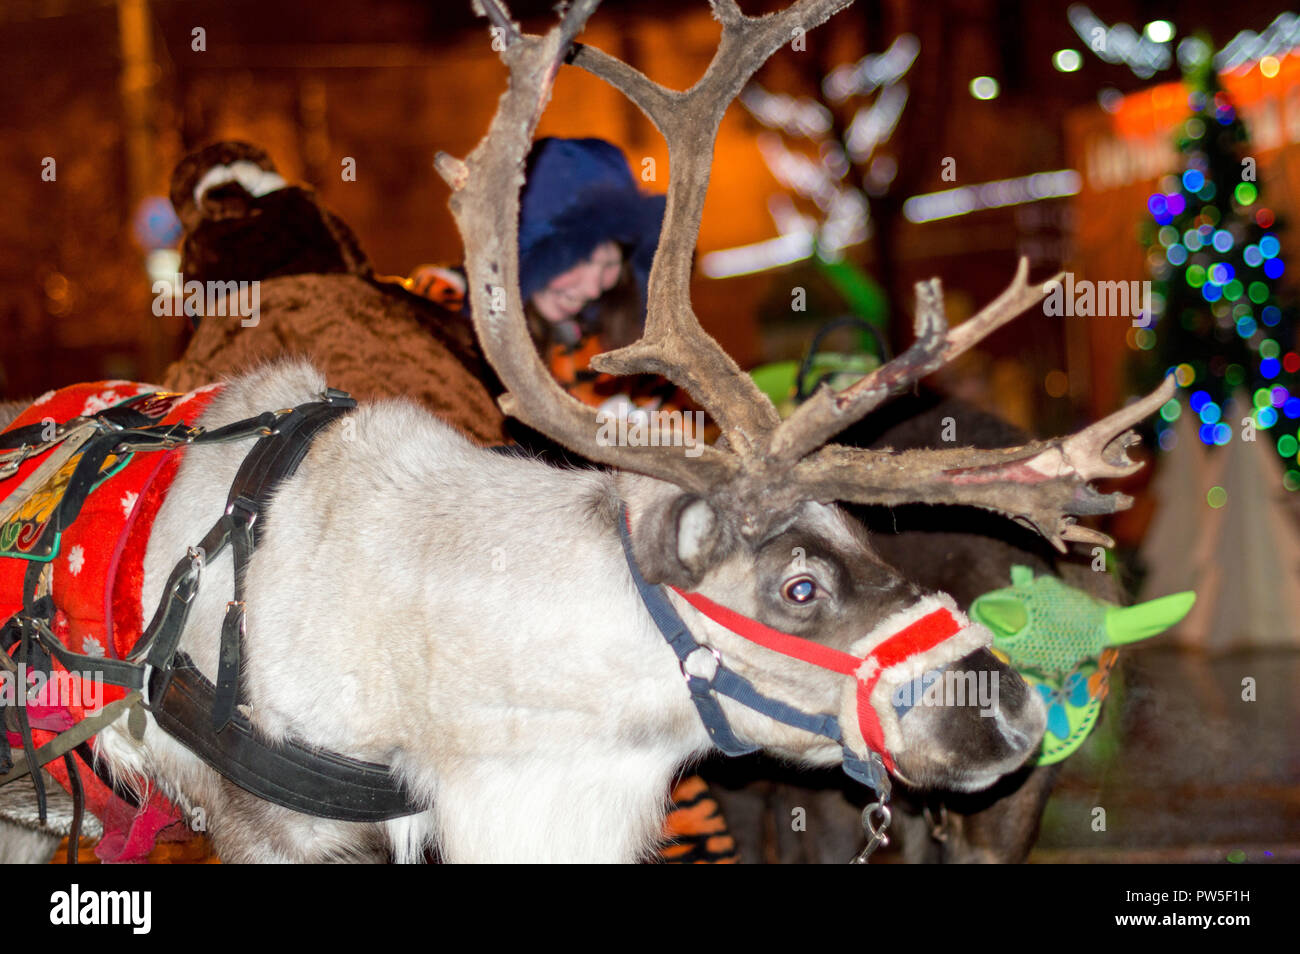 A young reindeer harnessed to a festive harness stands at the New Year's tree and rolls the children. Russia. Stock Photo